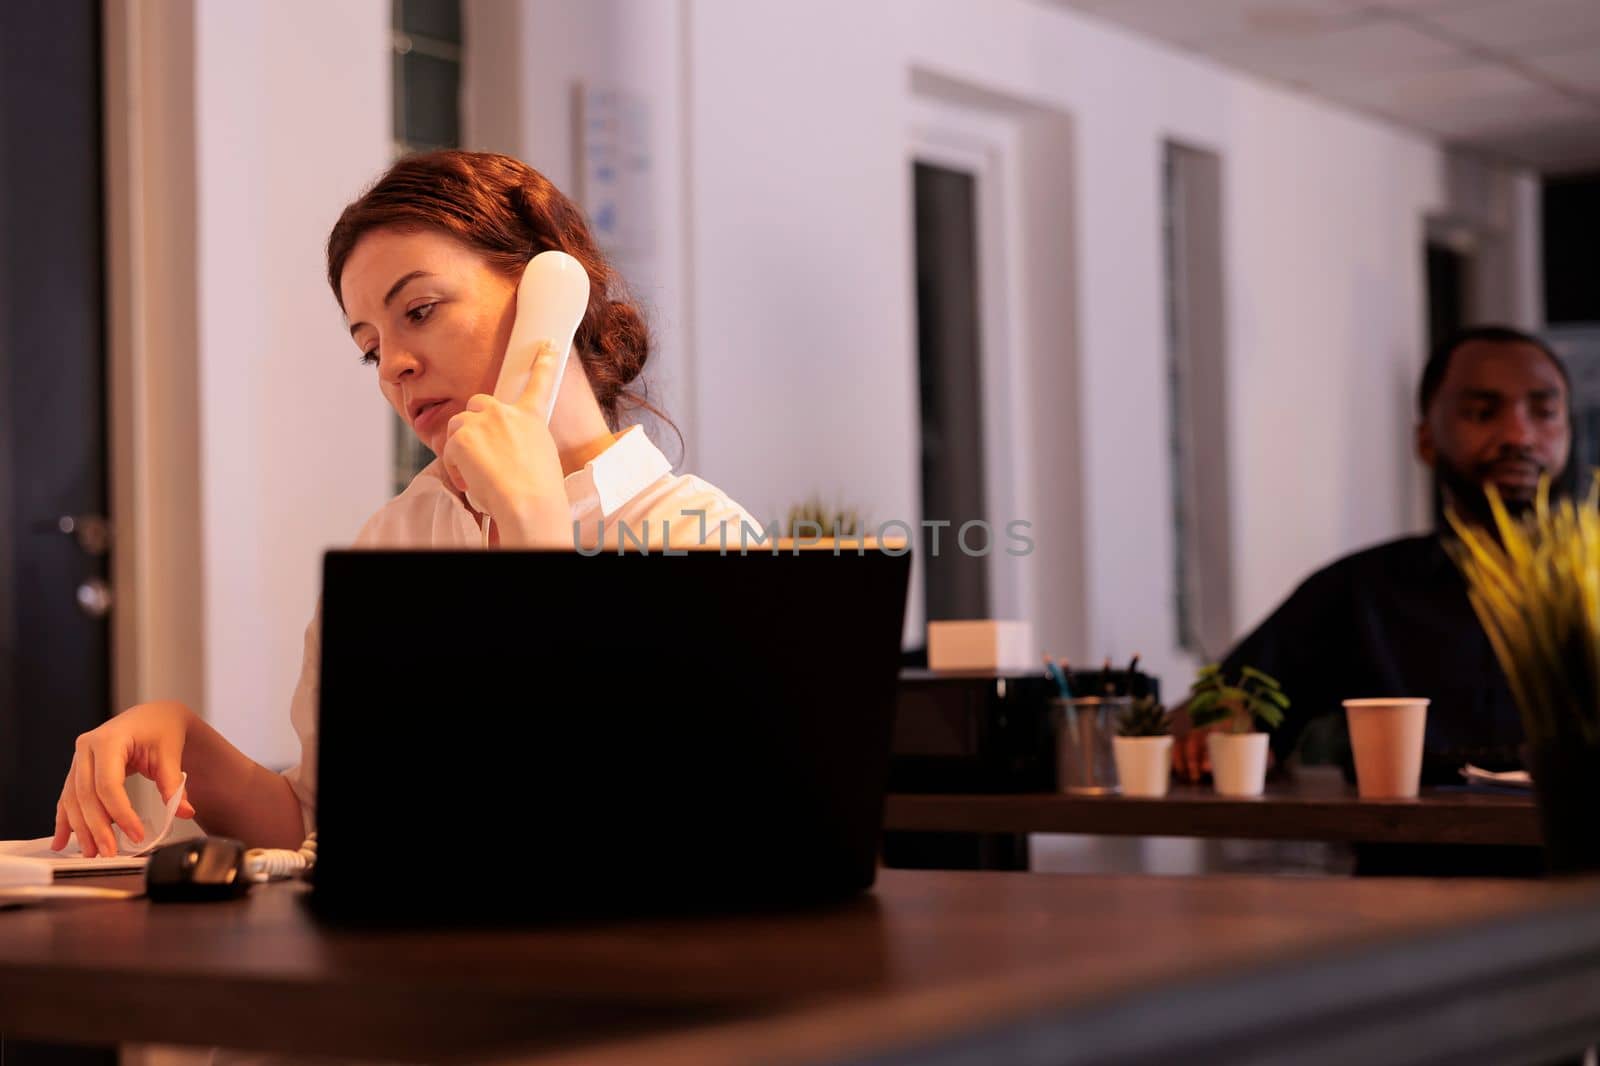 Secretary talking with client on landline phone, discussing report, employee answering customer call. Corporate worker having telephone communication in coworking space at night